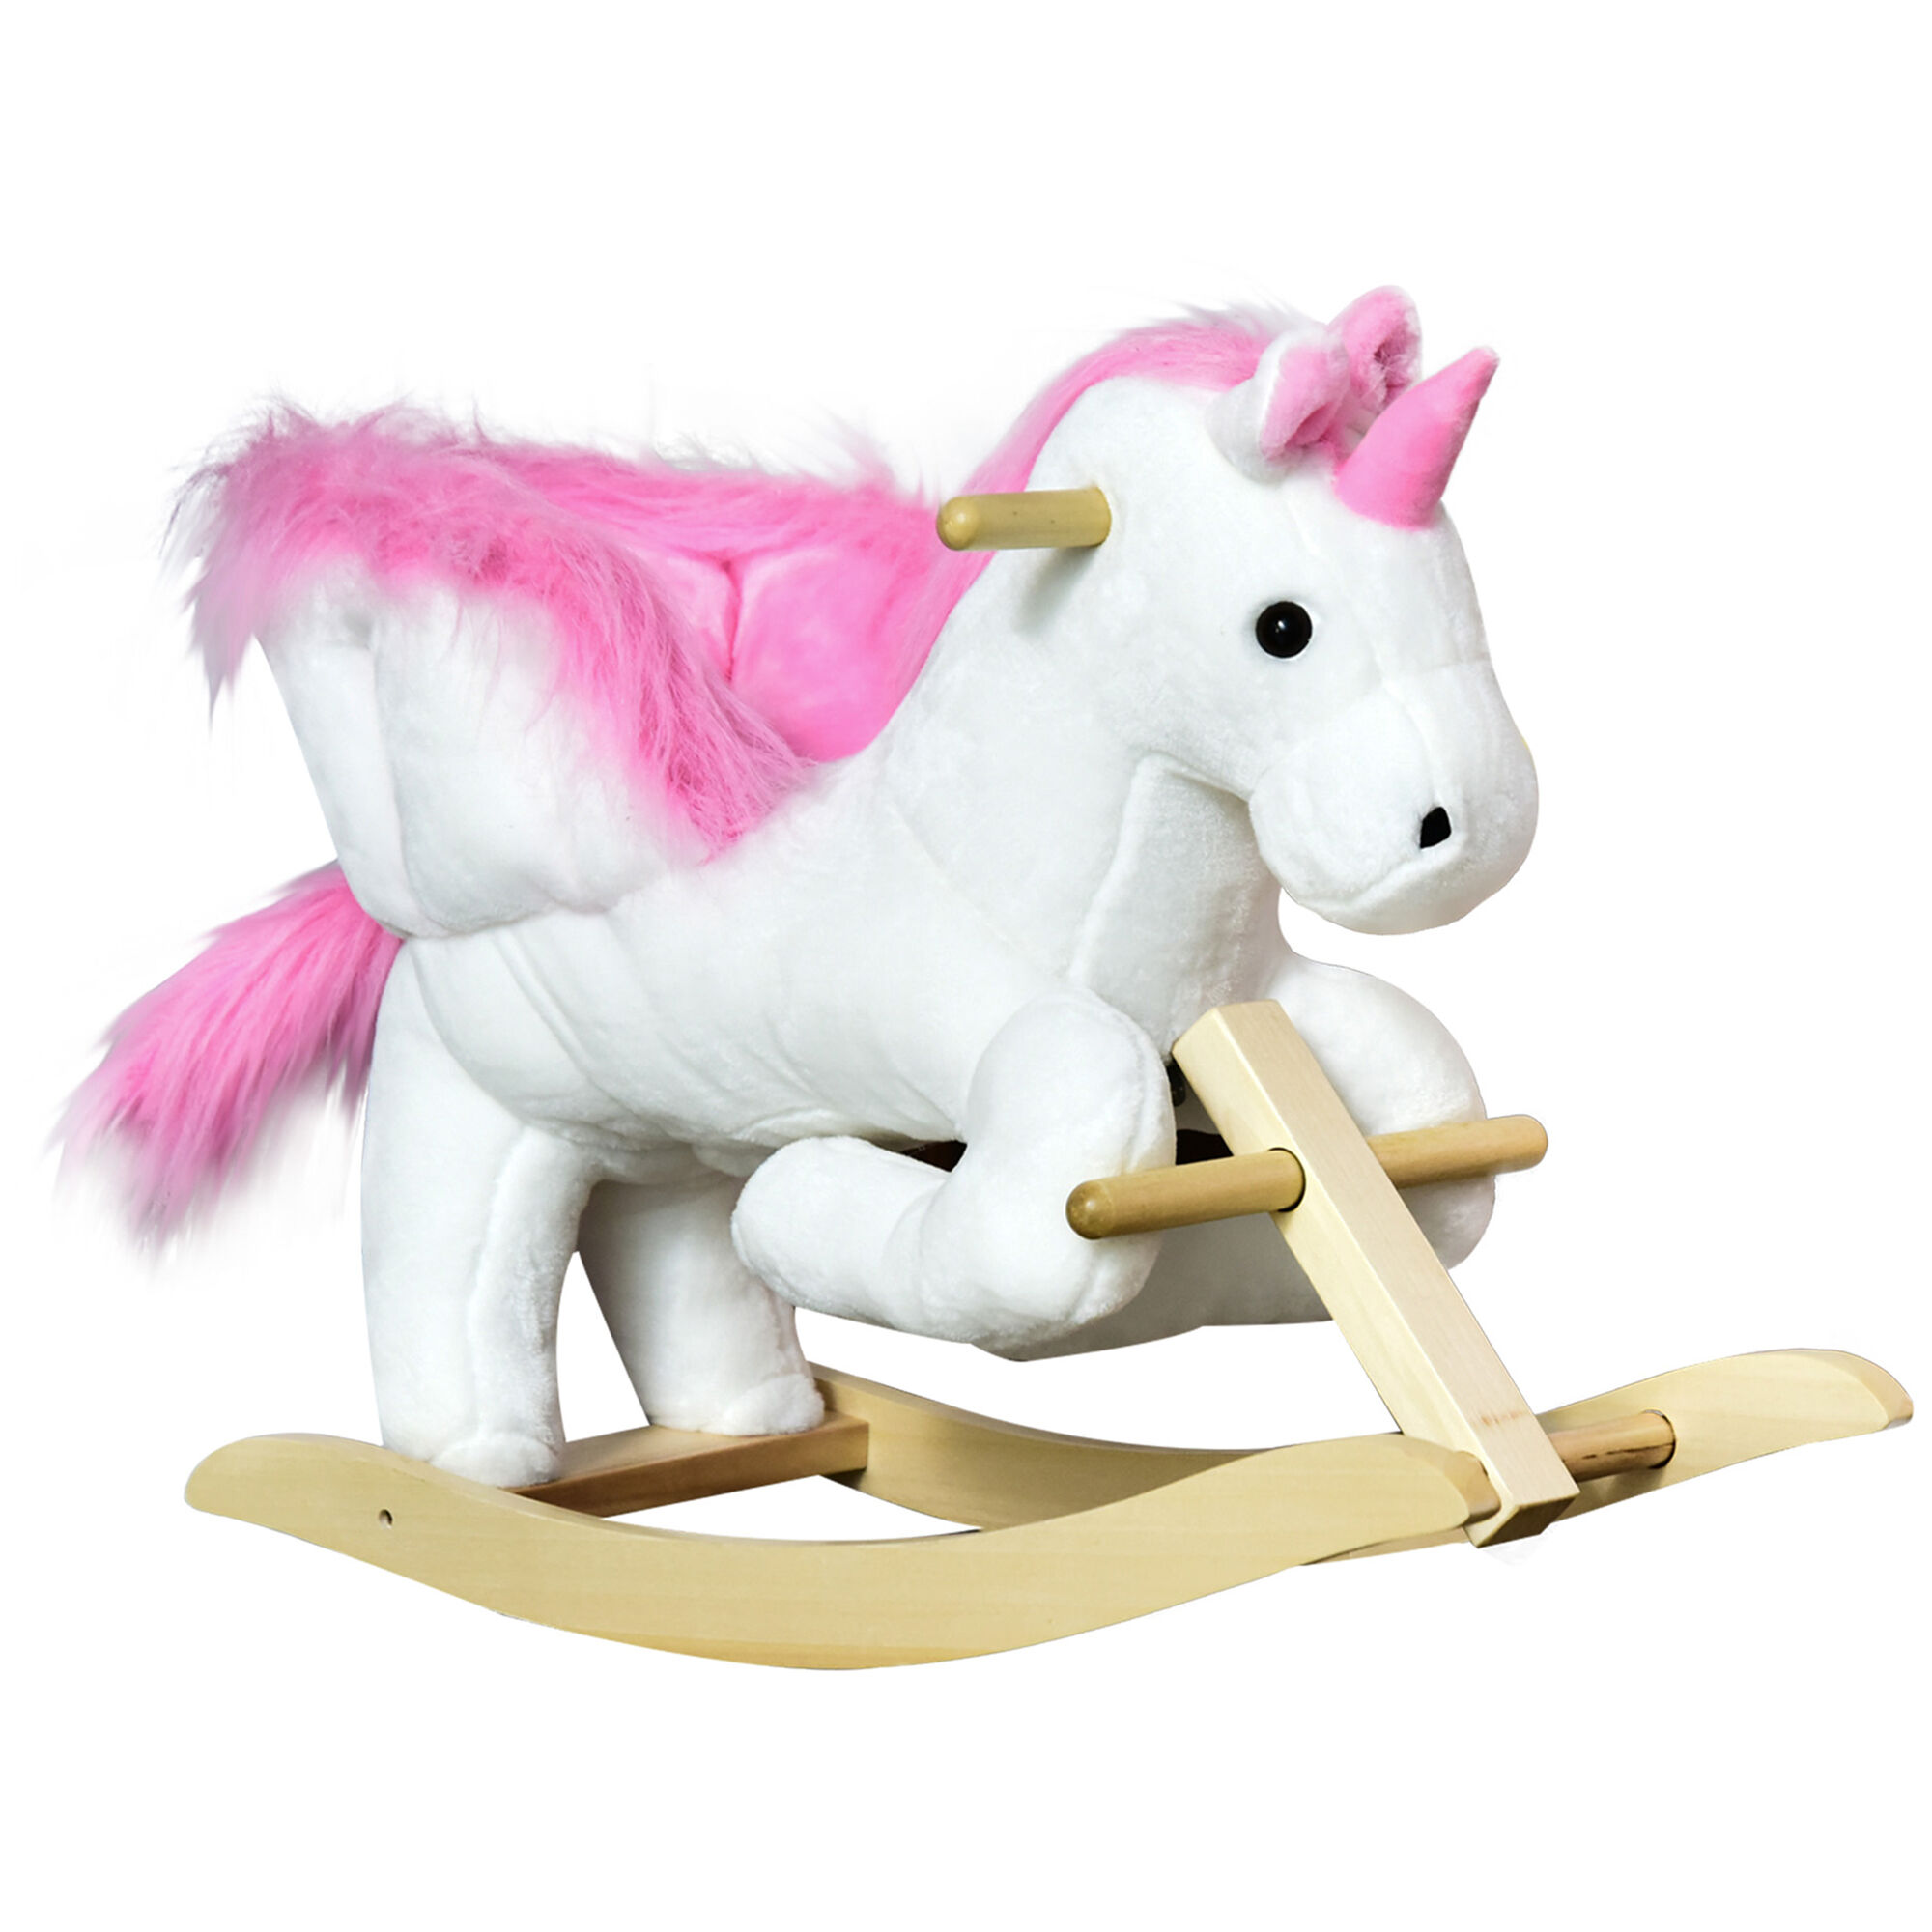 Qaba Baby Rocking Horse, Wooden Plush Ride-On Unicorn Chair PlayToy with Lullby Song for 18-36 months Child Kids, White/Pink